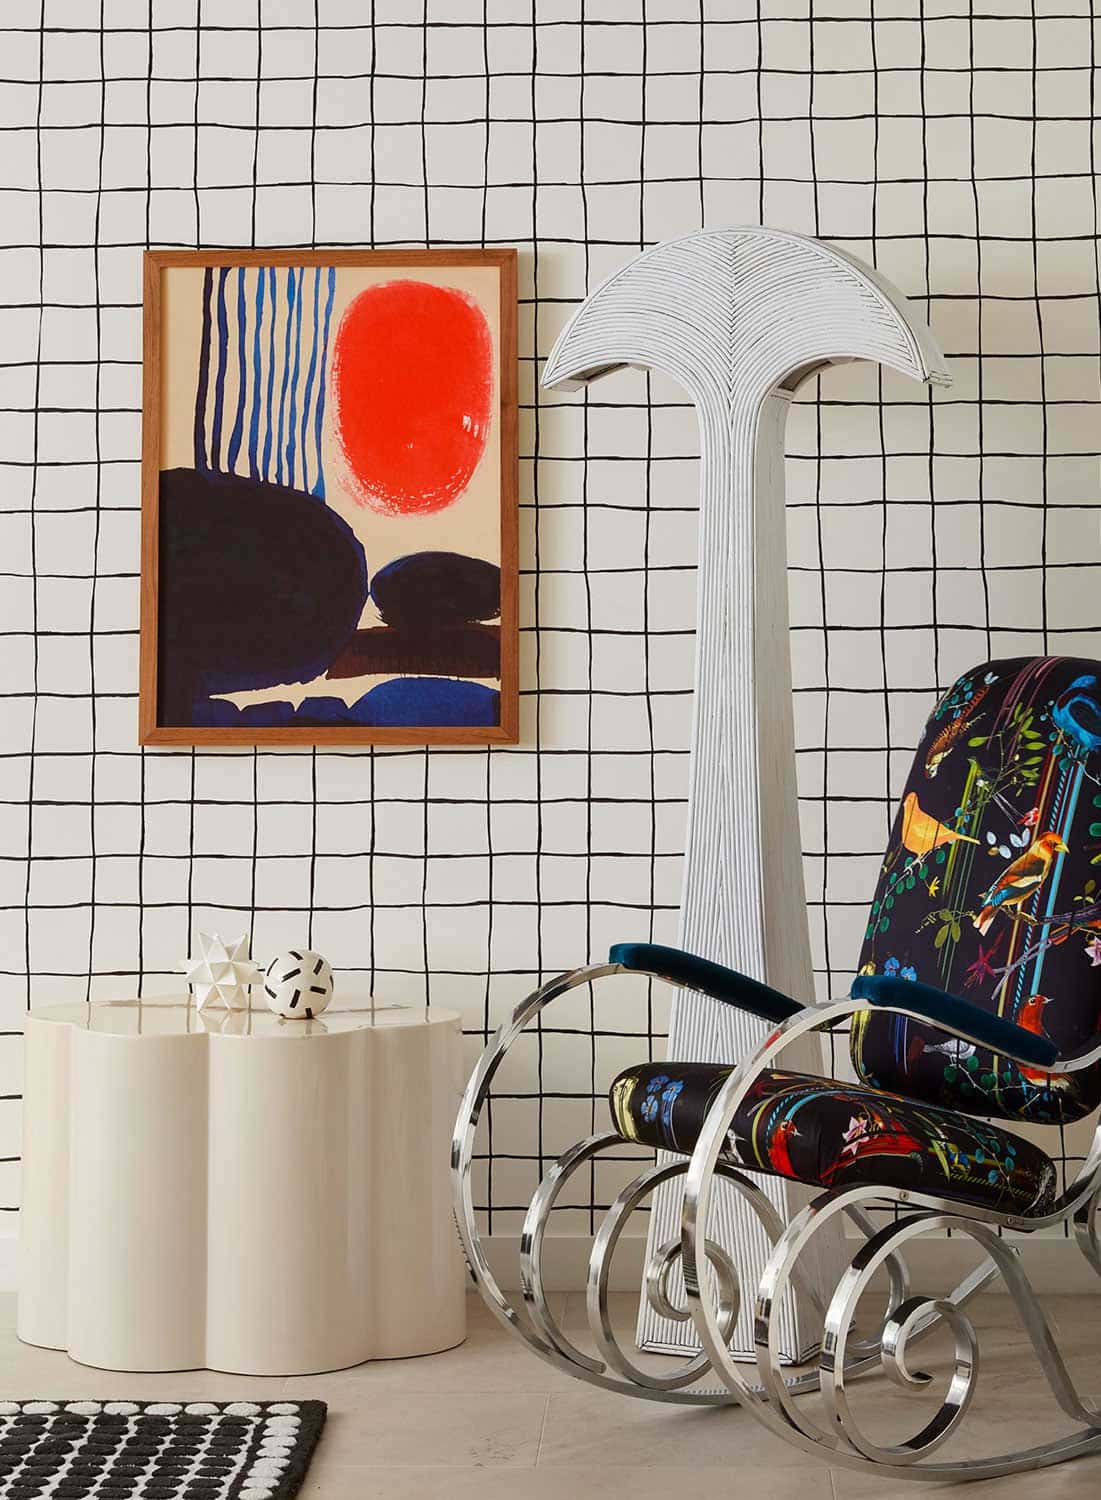 Graphic black and white grid pattern wallpaper in kids playroom with colorful art and vintage rocking chair